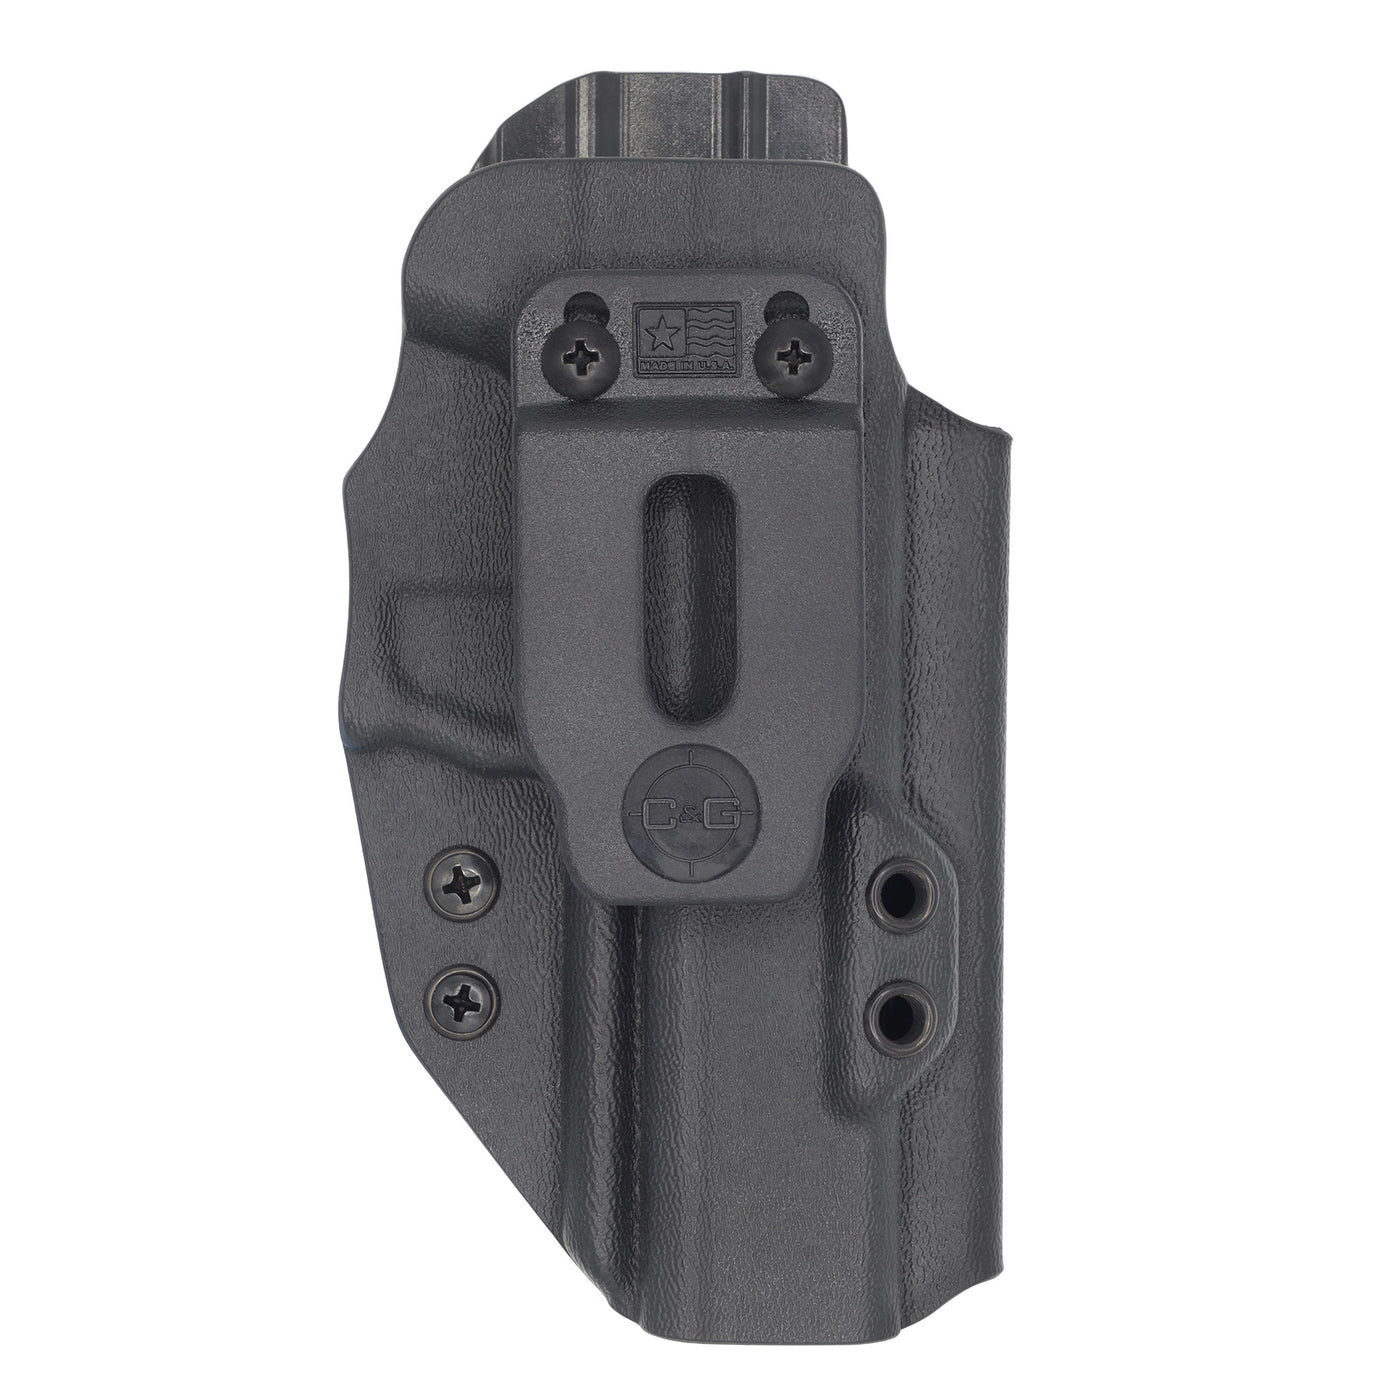 This is the quickship C&G Holsters inside the waistband holster for the Poly80 PF940V2.